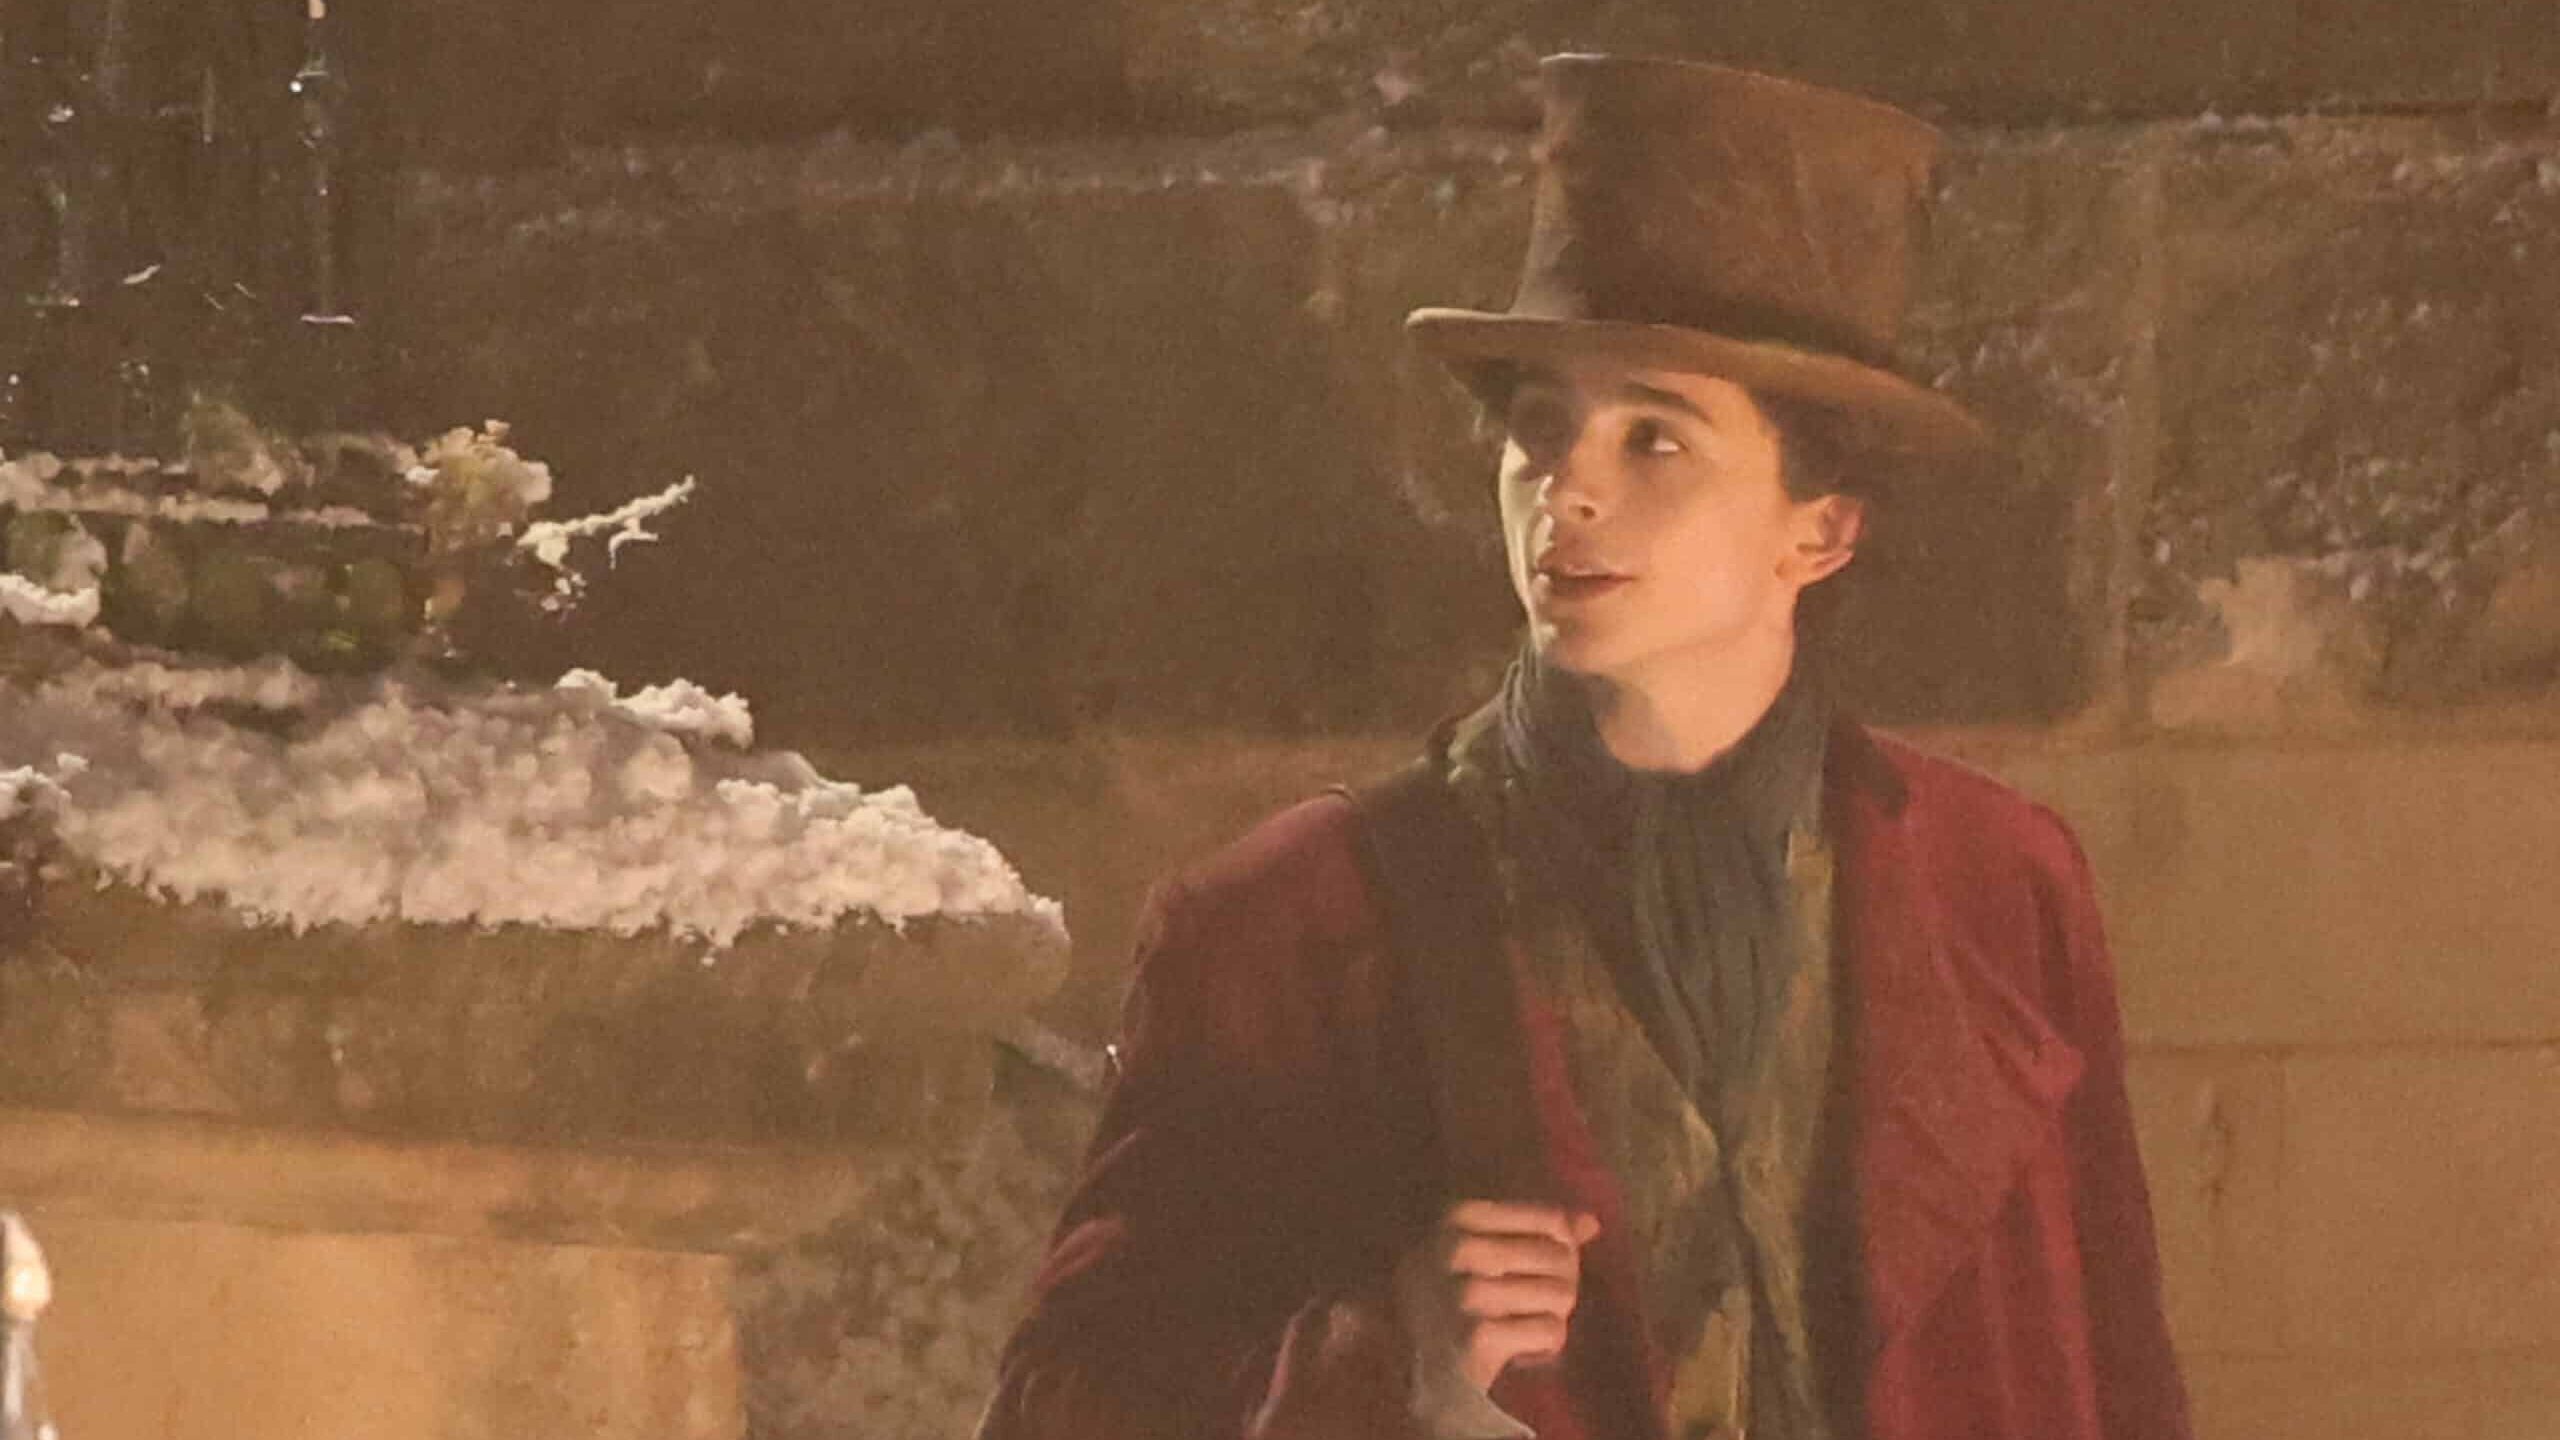 BATH, ENGLAND - OCTOBER 14: Timothée Chalamet seen filming the new Willy Wonka movie on October 14, 2021 in Bath, England.